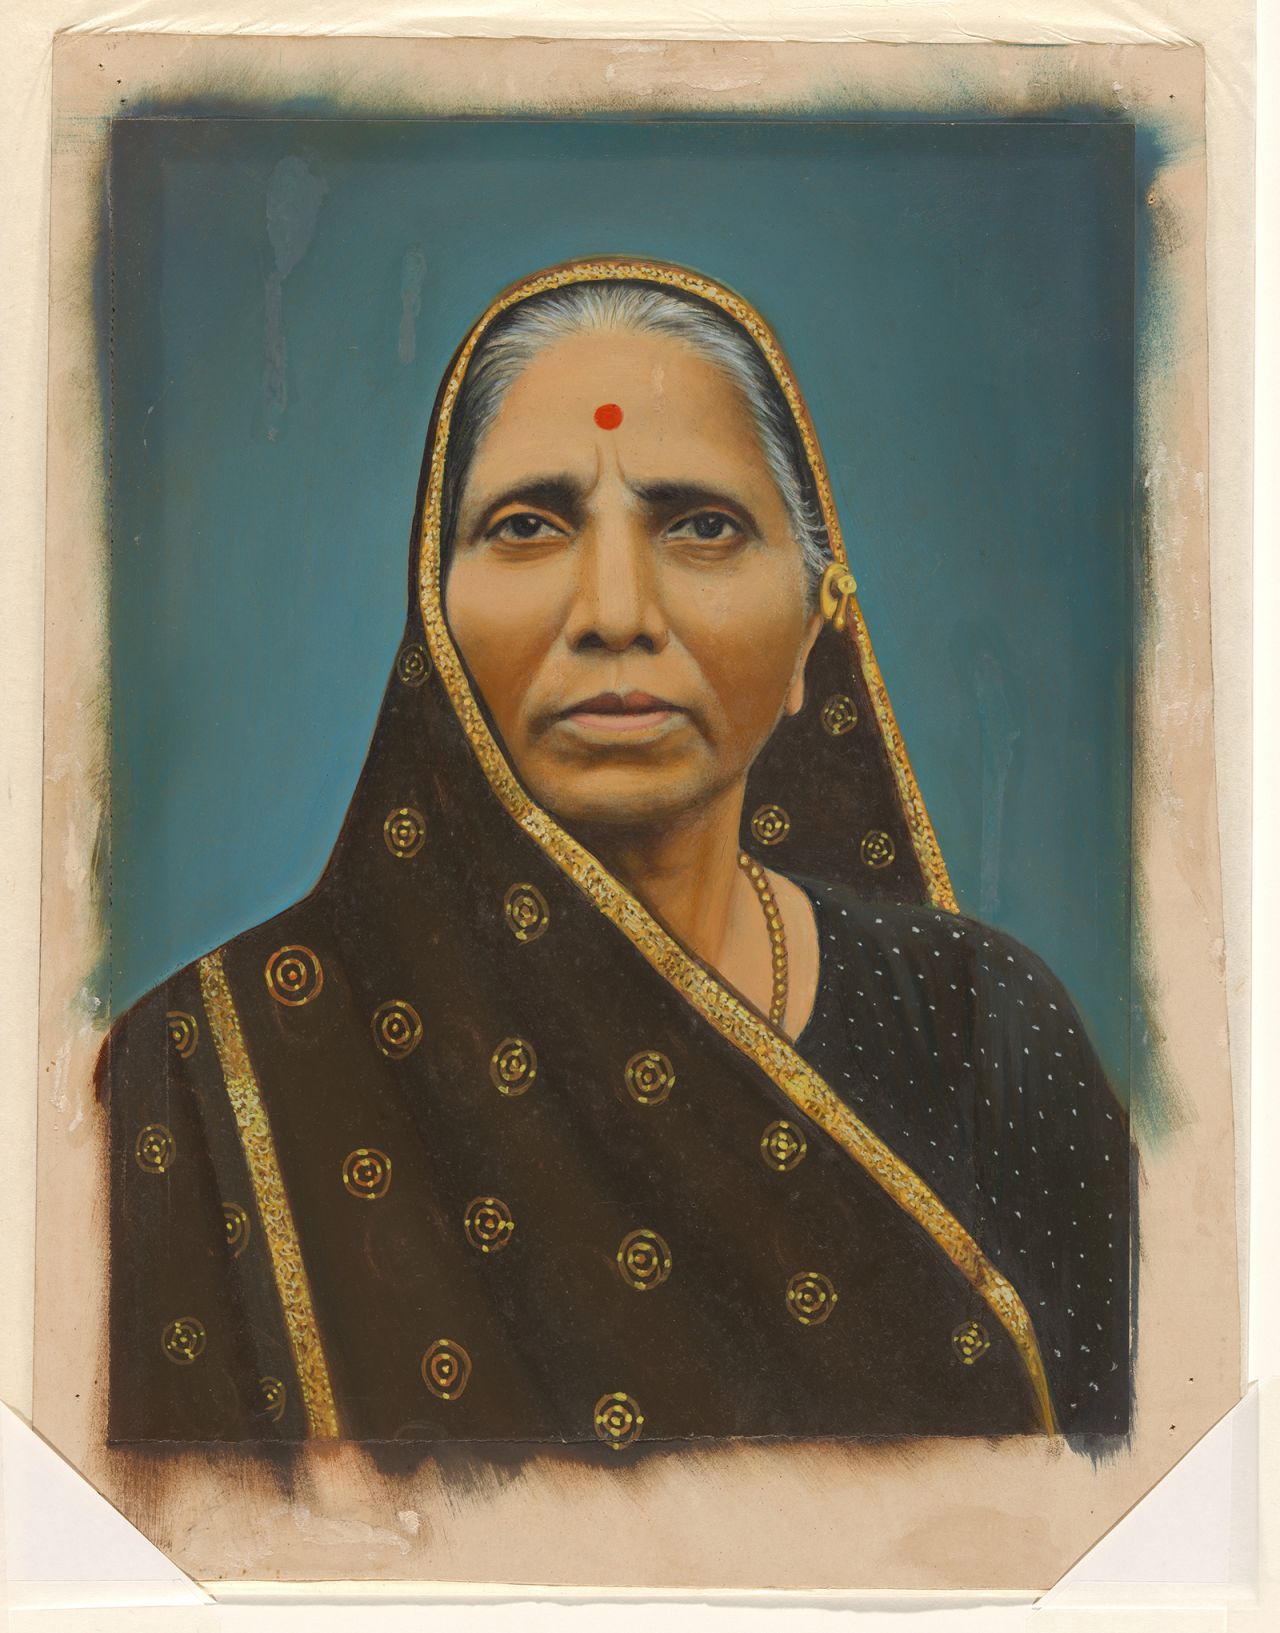 An untitled portrait of a woman, purchased from Subhash Kapoor's gallery in 2009, is among the items being returned.